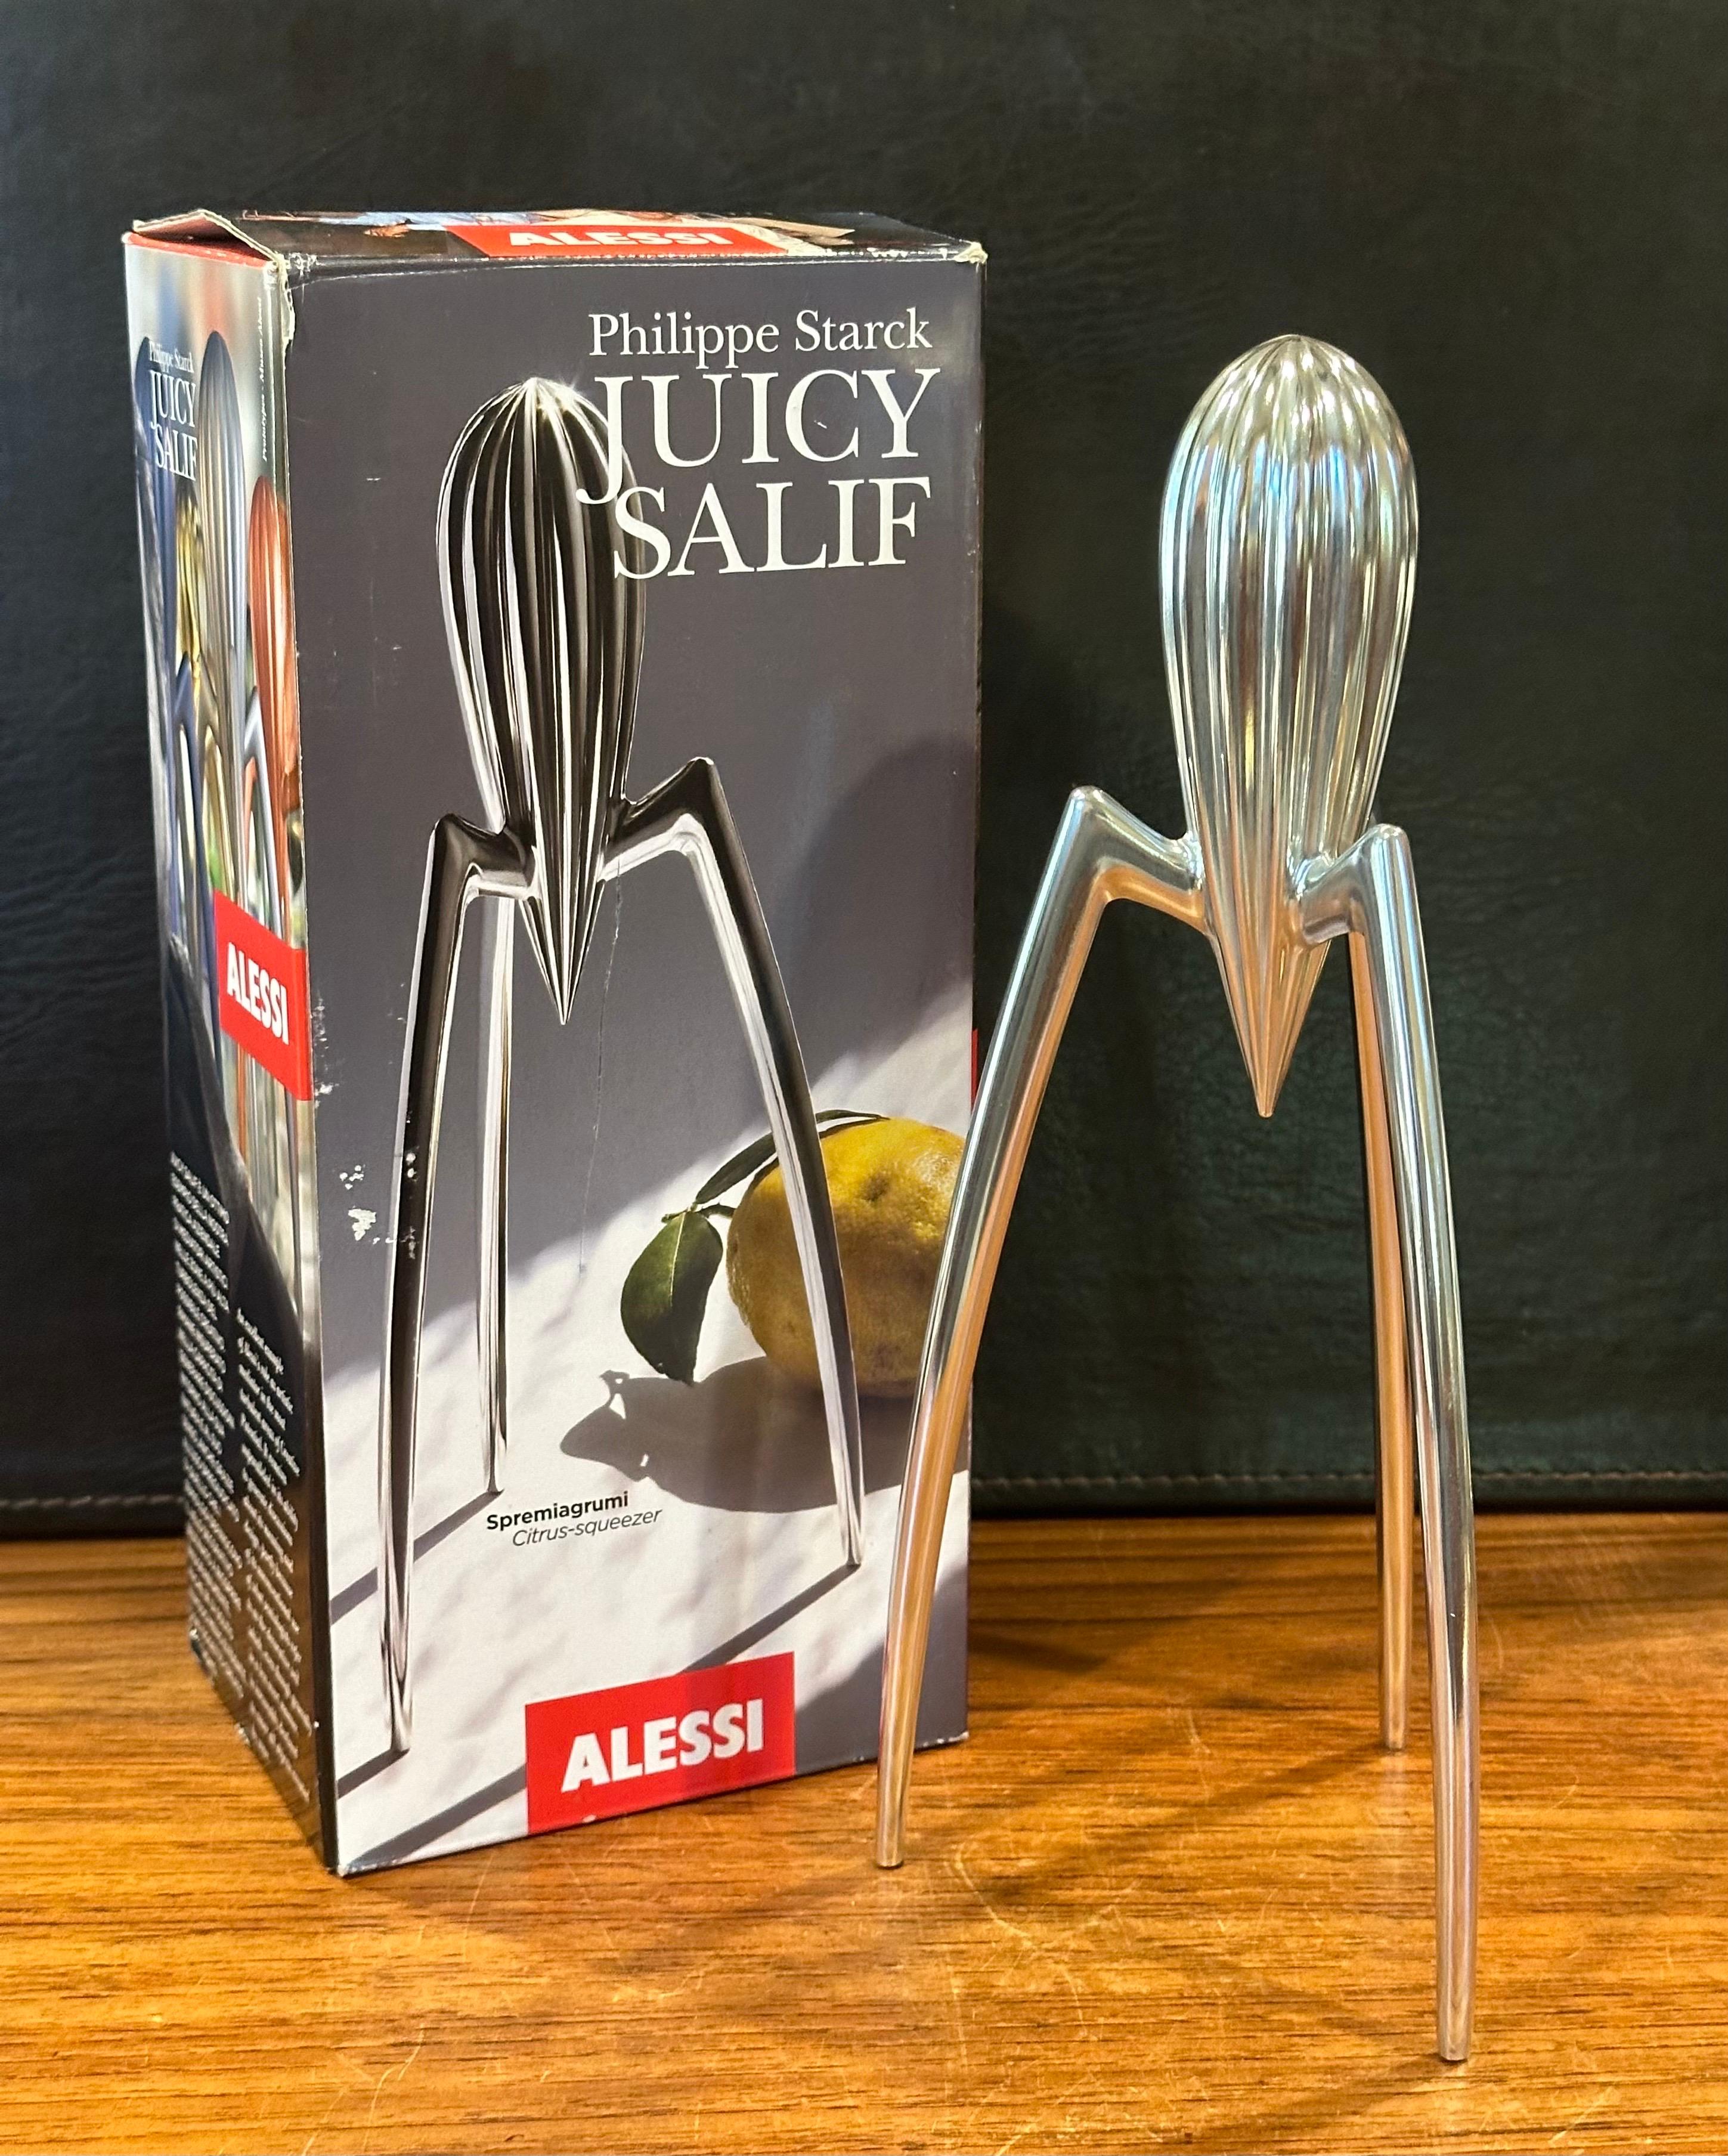 A classic post-modern aluminum lemon squeezer with original box by Philippe Starck for Alessi, circa 1990s. The piece is in very good vintage condition, measures 5